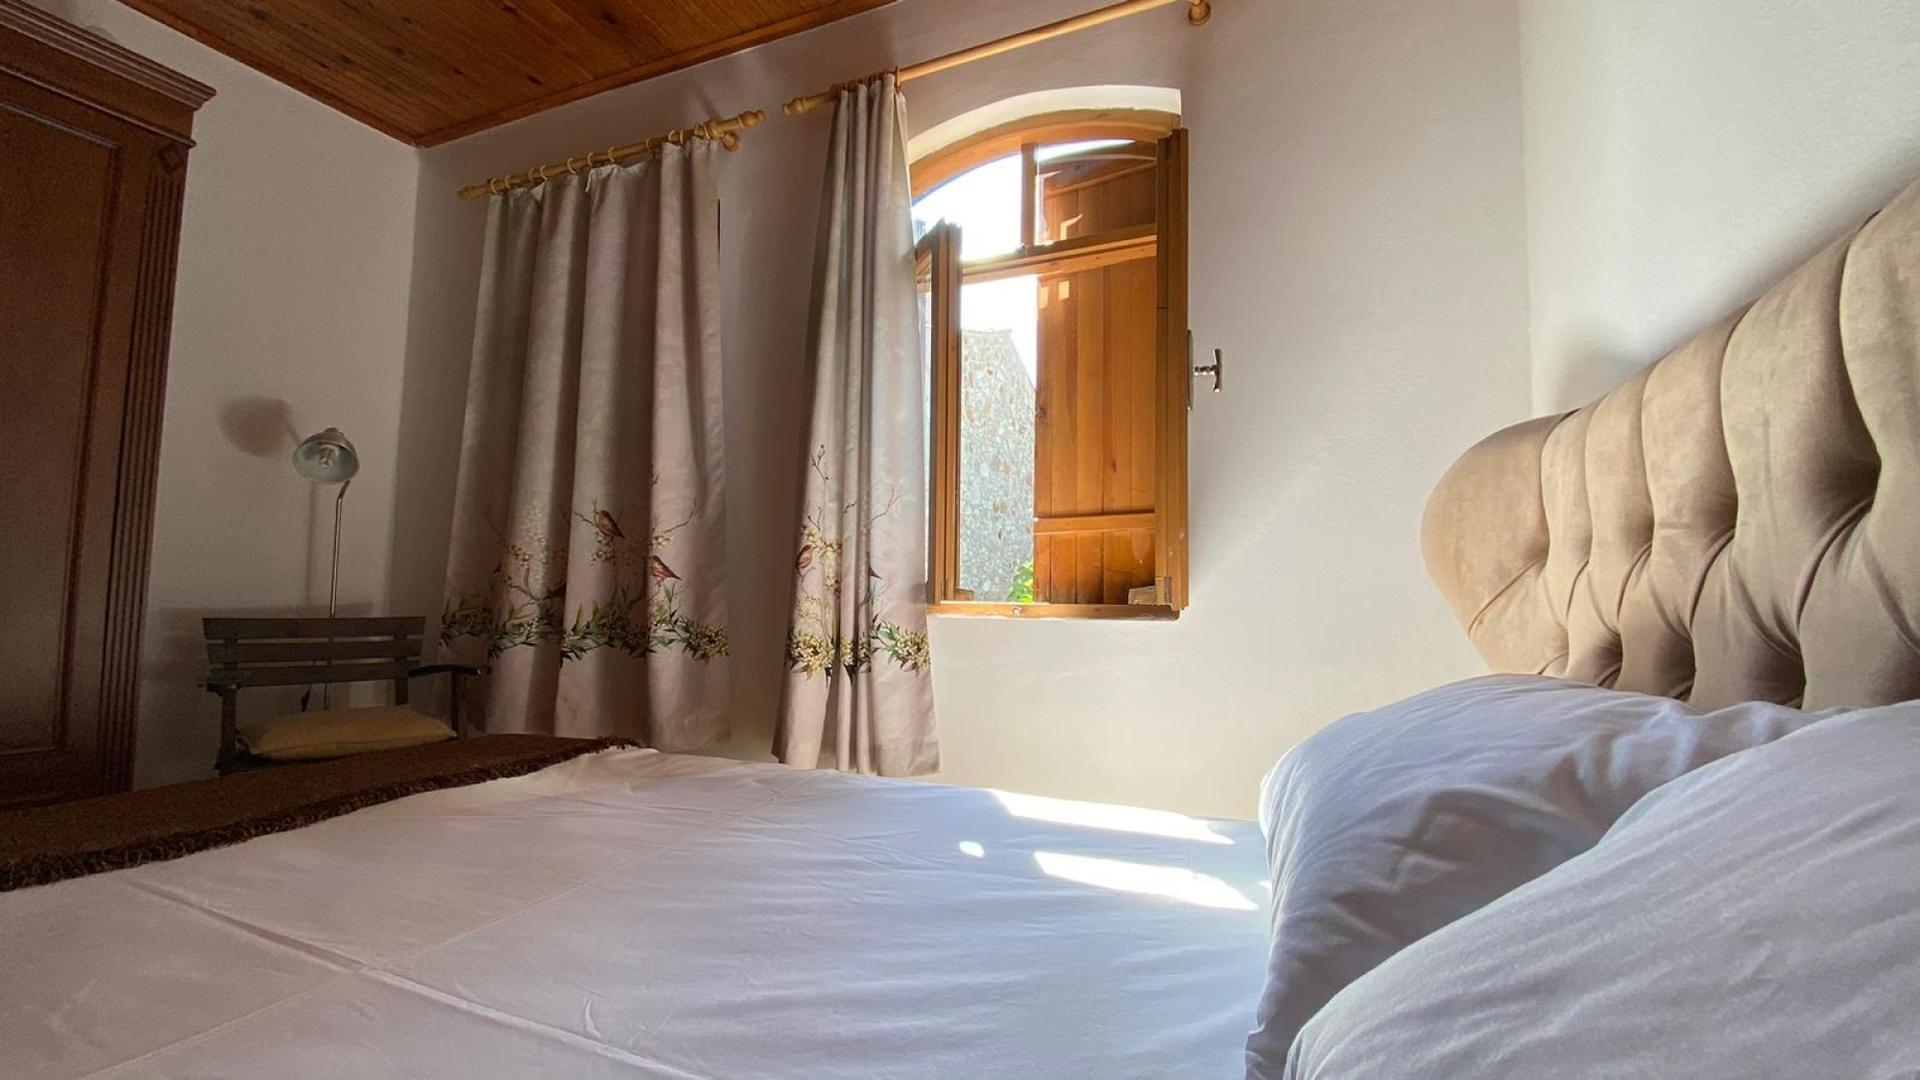 You can gaze outside through the window in the room and breathe in the wonderful air of Bozcaada.